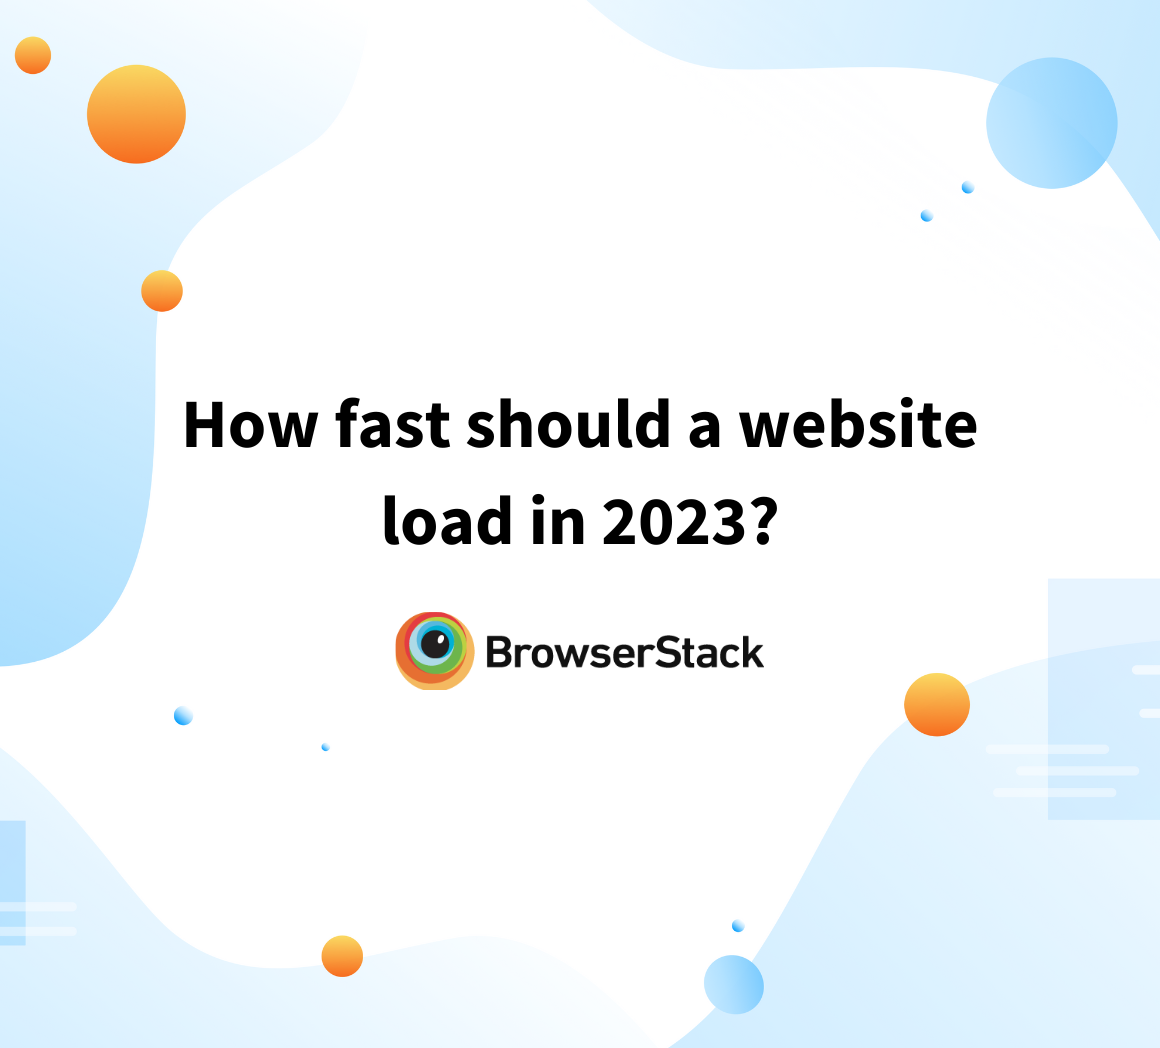 How fast should a website load in 2023?